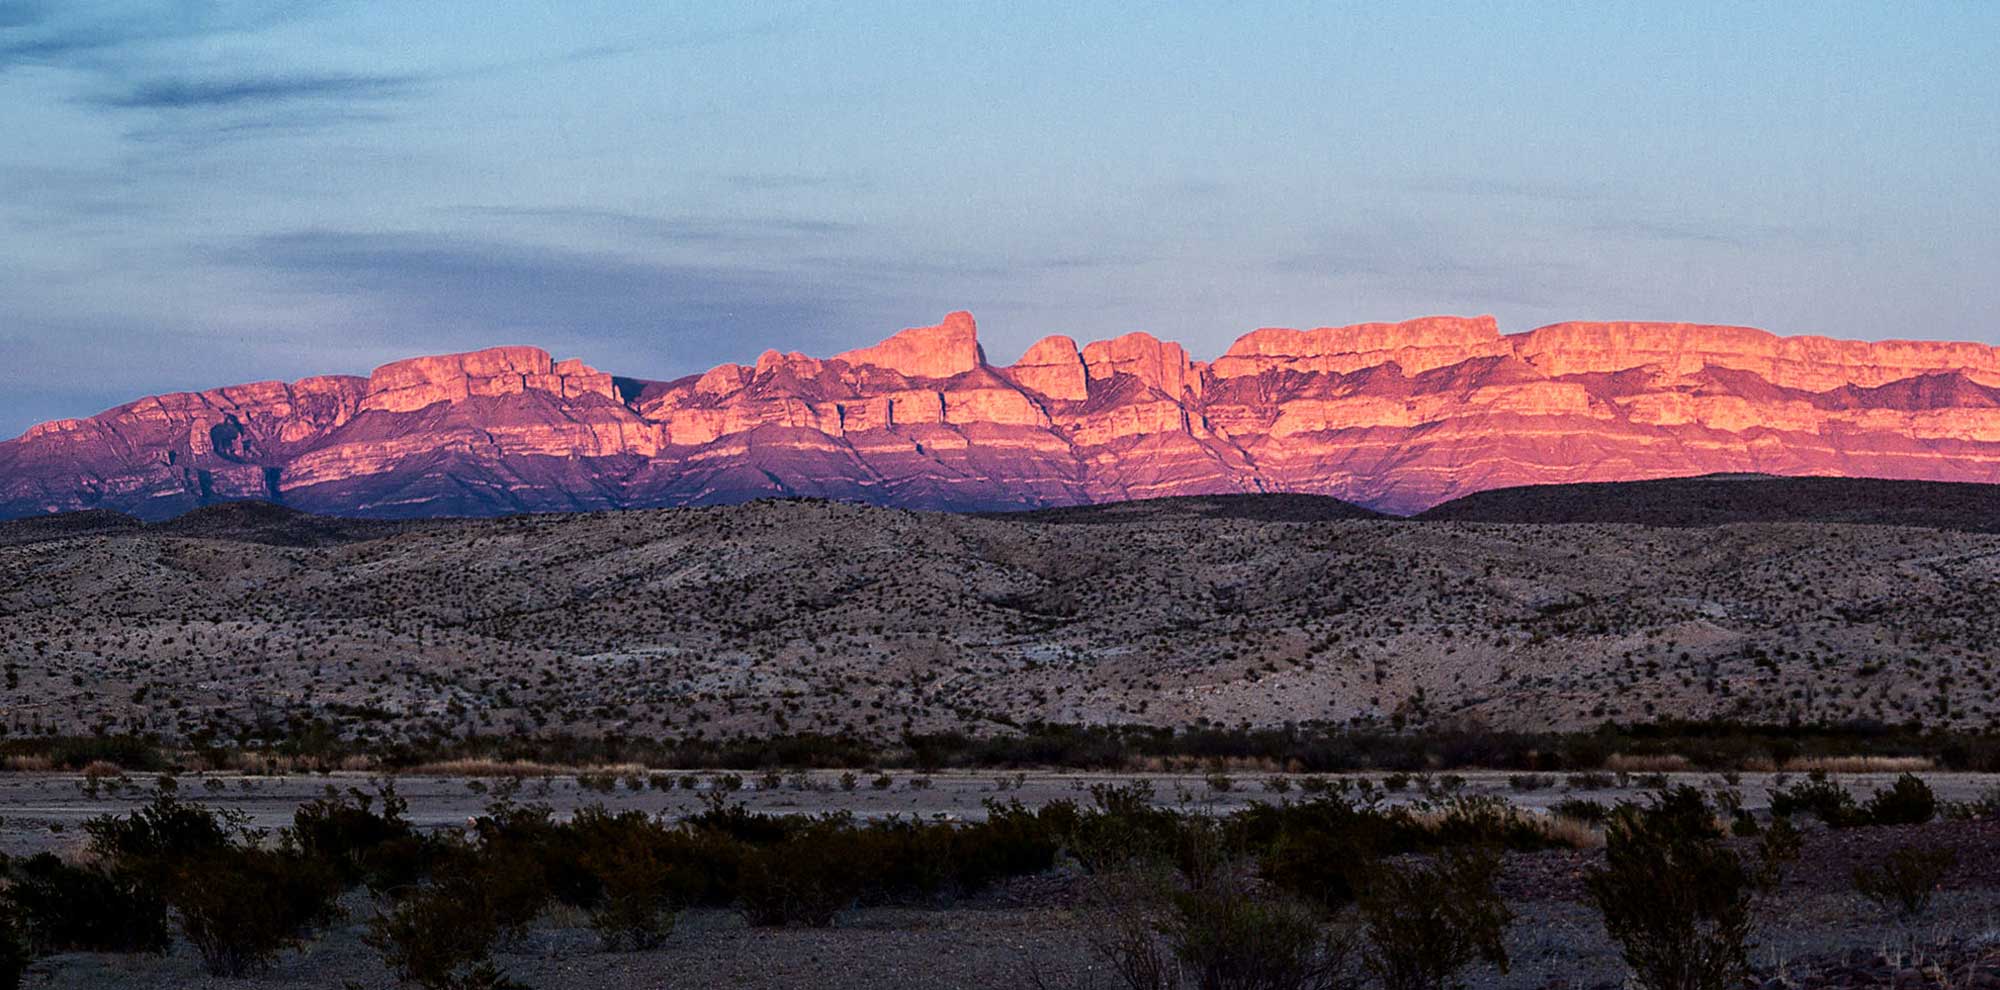 Photograph of Sierra Del Carmen at sunset in Big Bend National Park, Texas.